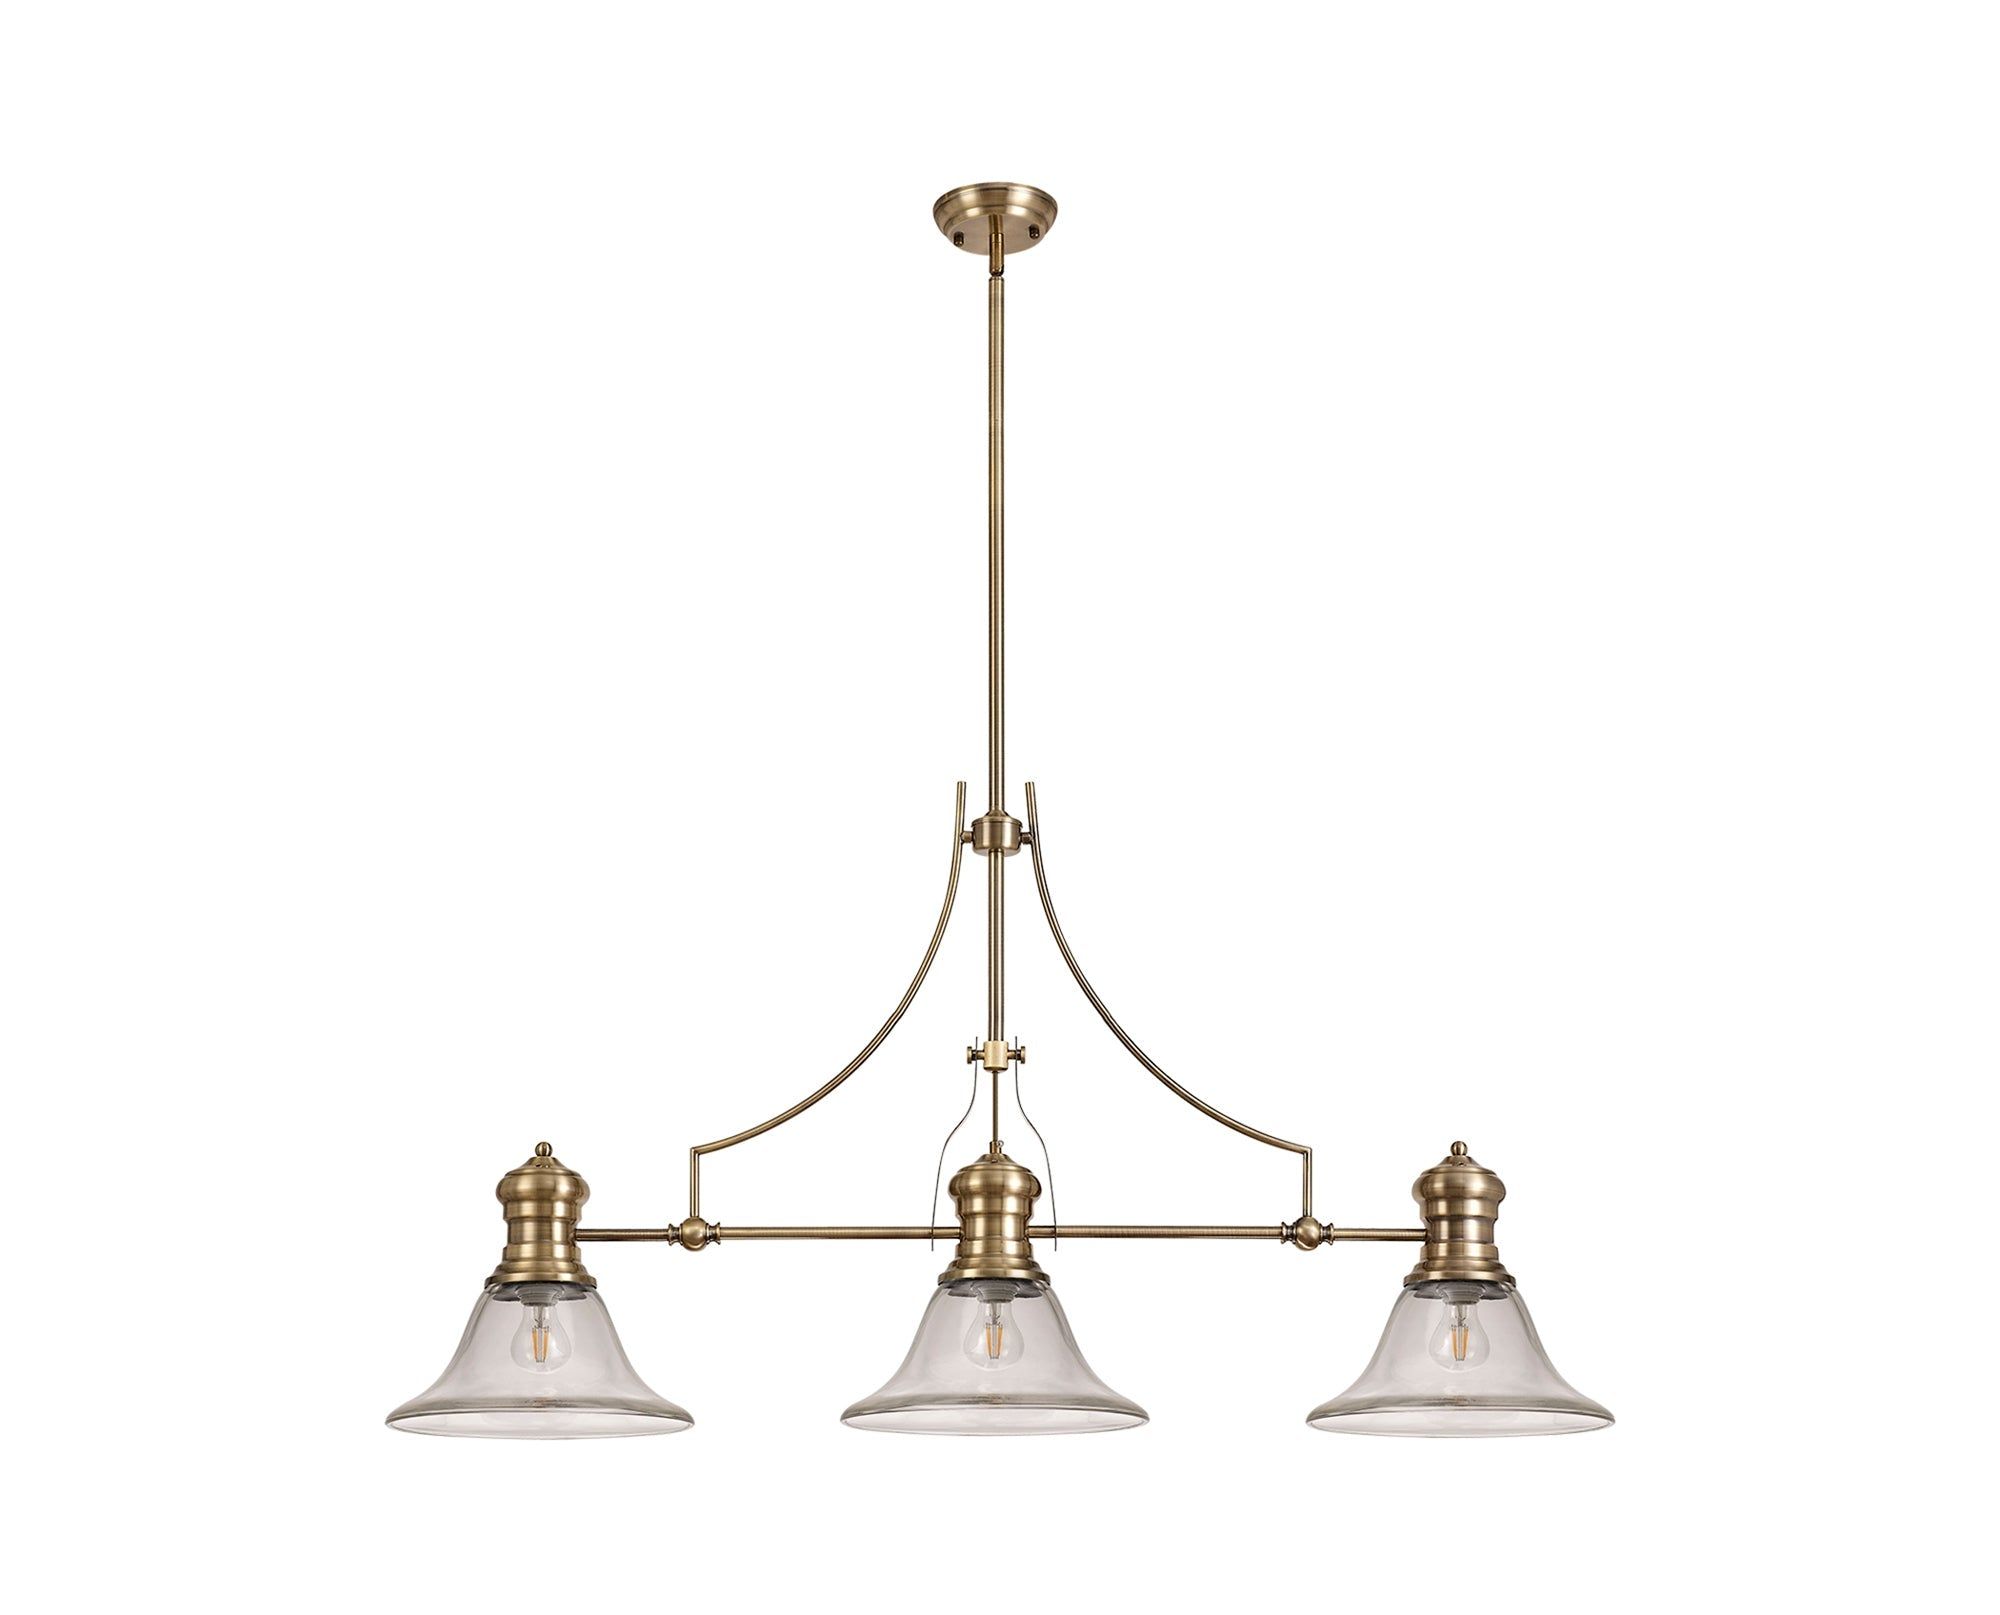 Savannah 3 Light Linear Pendant E27 With 30cm Smooth Bell Glass Shade, Antique Brass, Clear